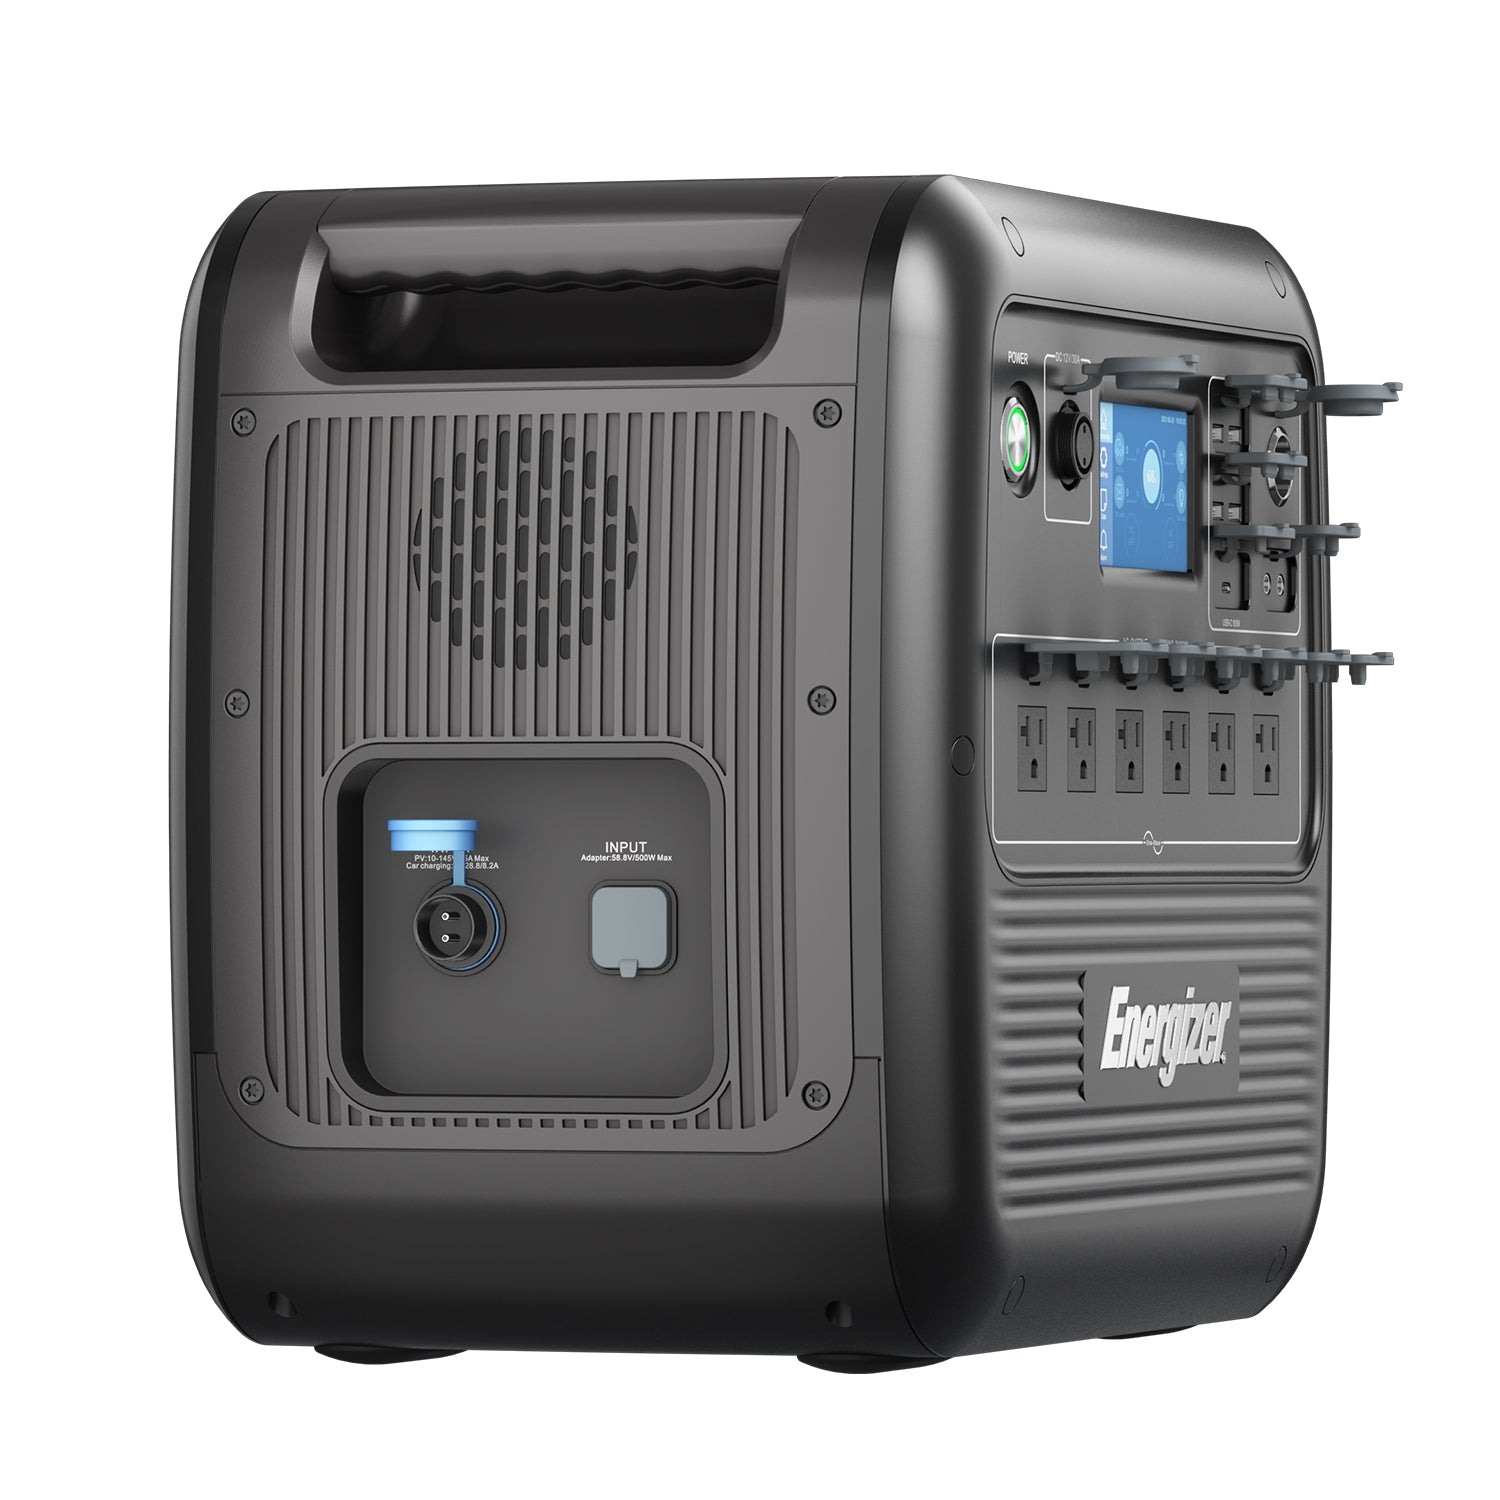 Energizer Portable Power Station PPS2000 -  2150Wh / 2100W